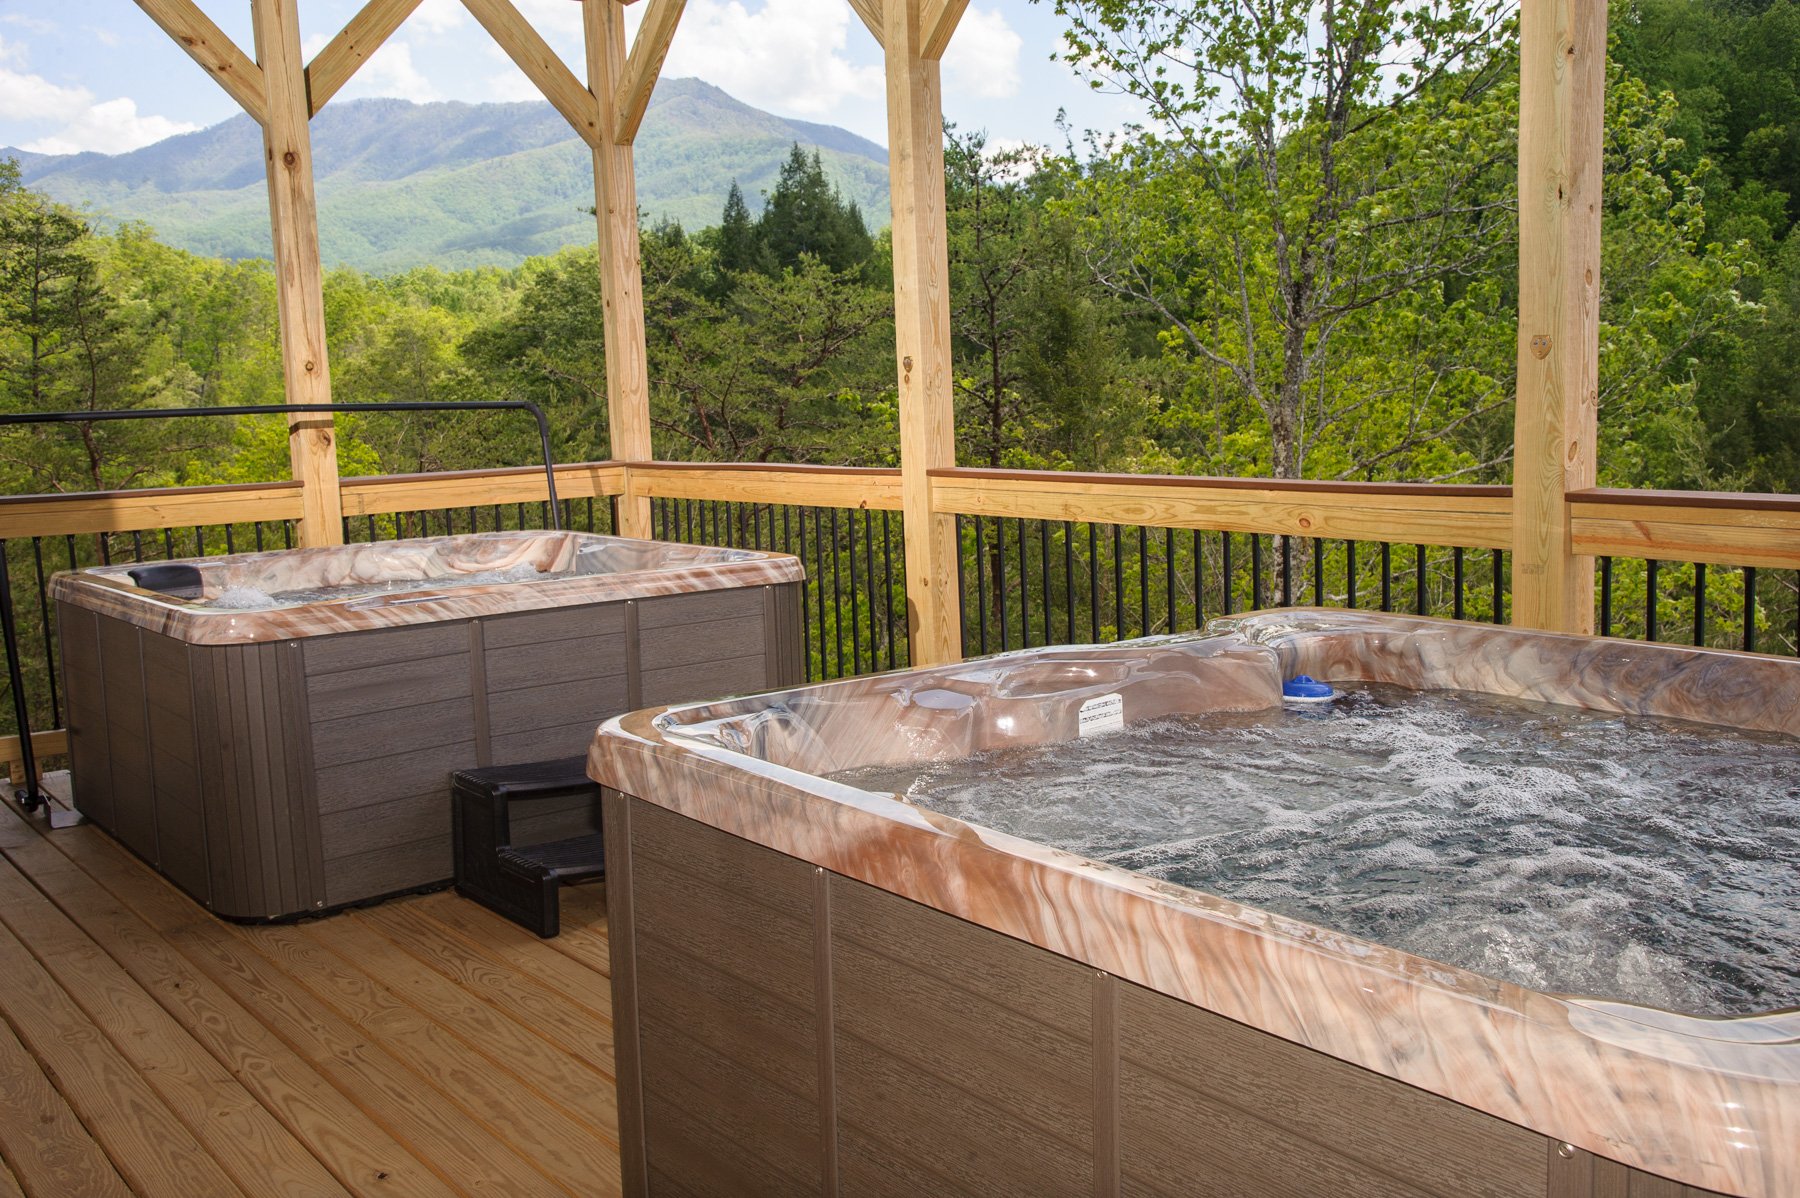 Guests Have Access to Two Hot Tubs.